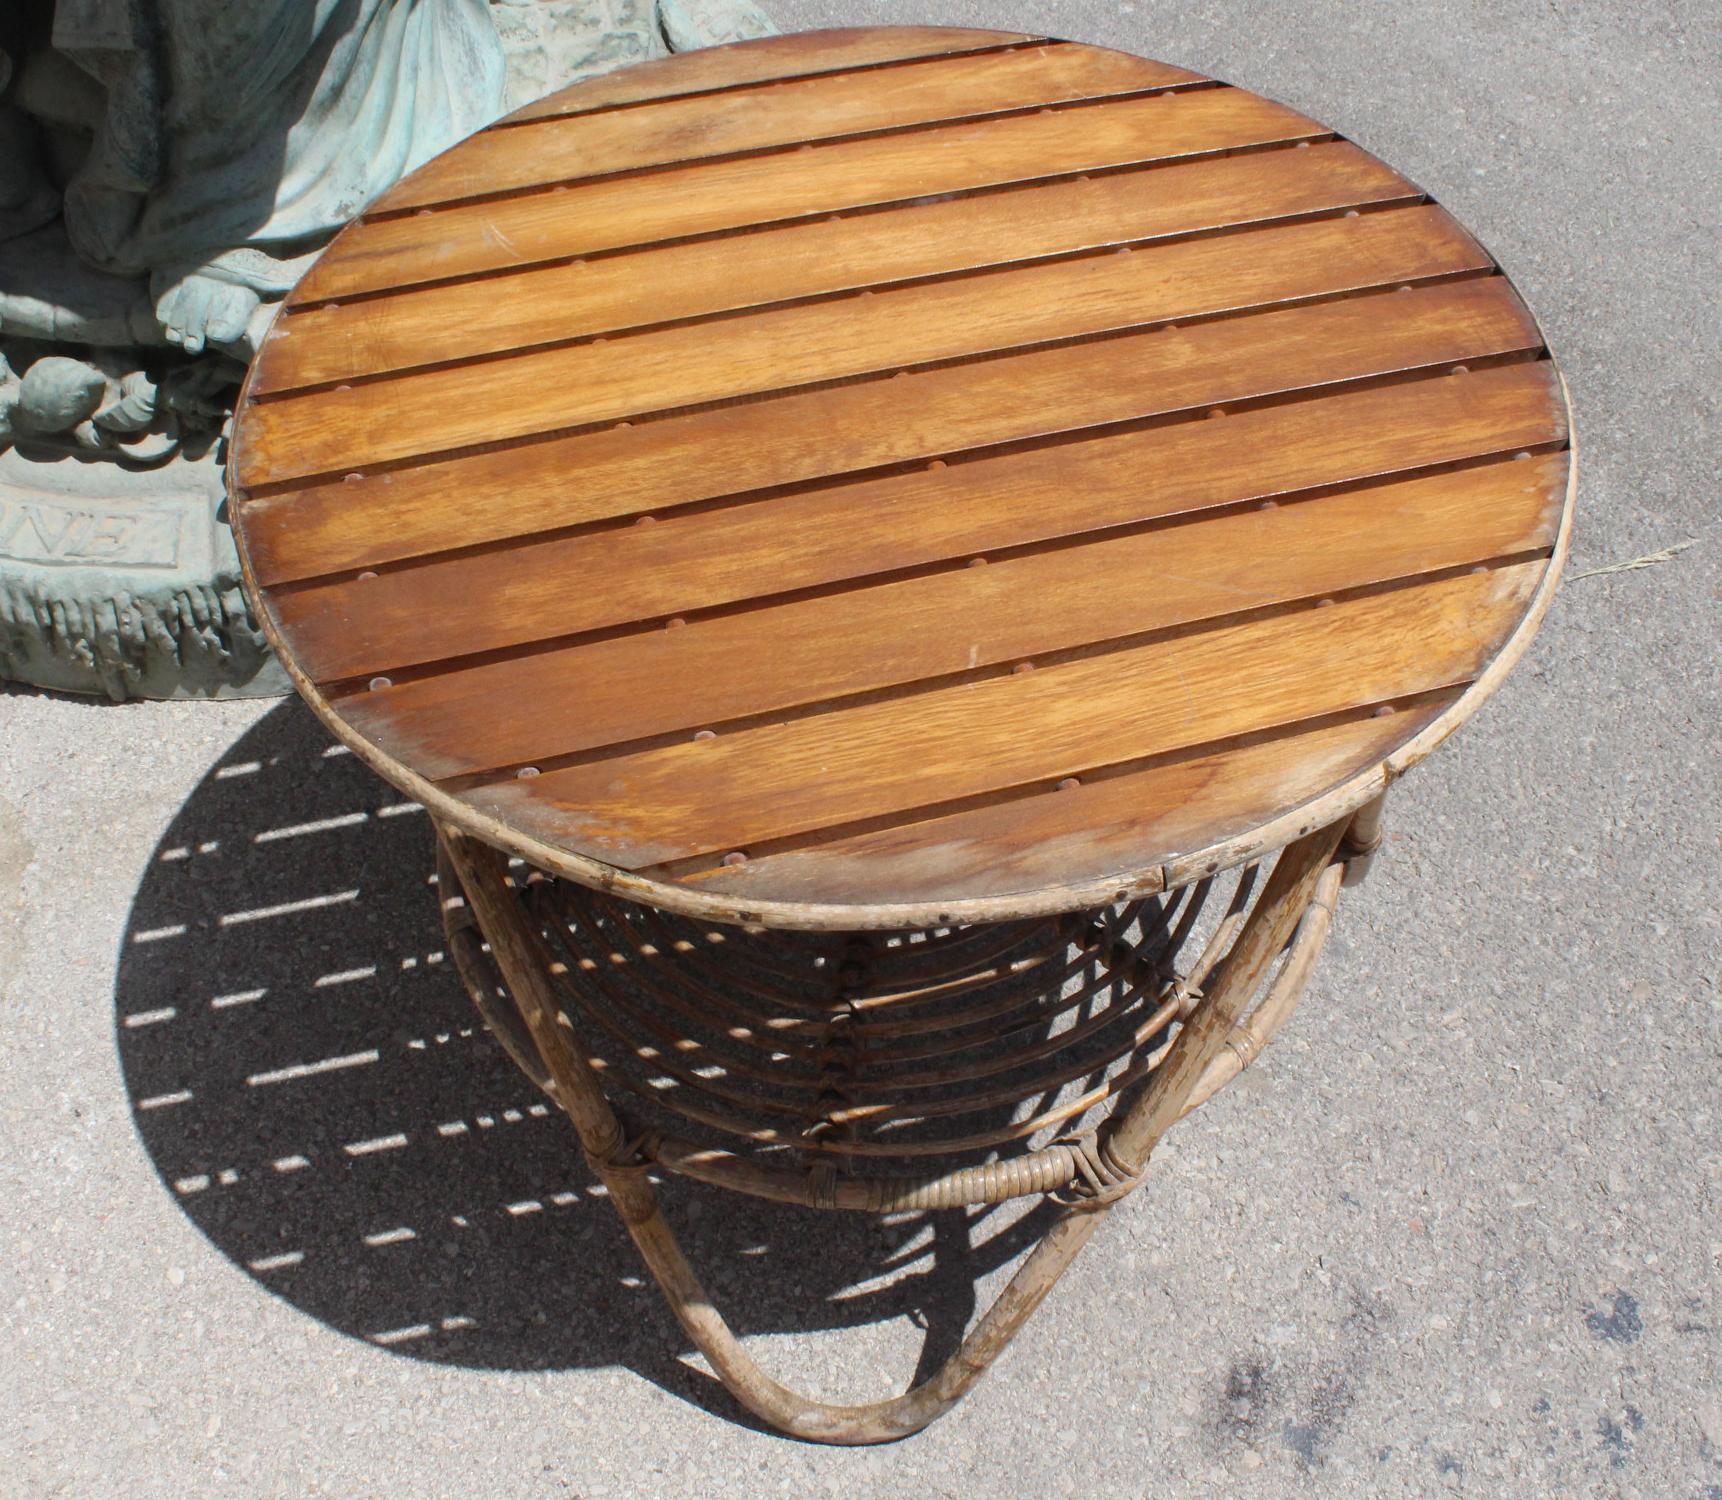 1970s round Spanish side table with bamboo feet, a low shelf and top with elongated wooden boards.